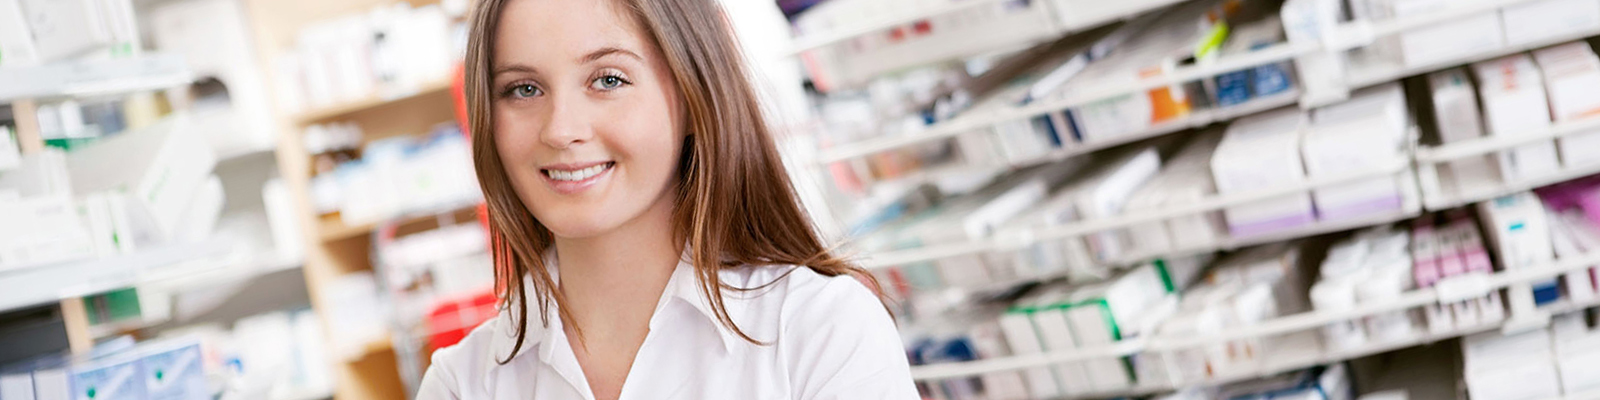 Young woman in posing in a pharmacy in front of rows of pills